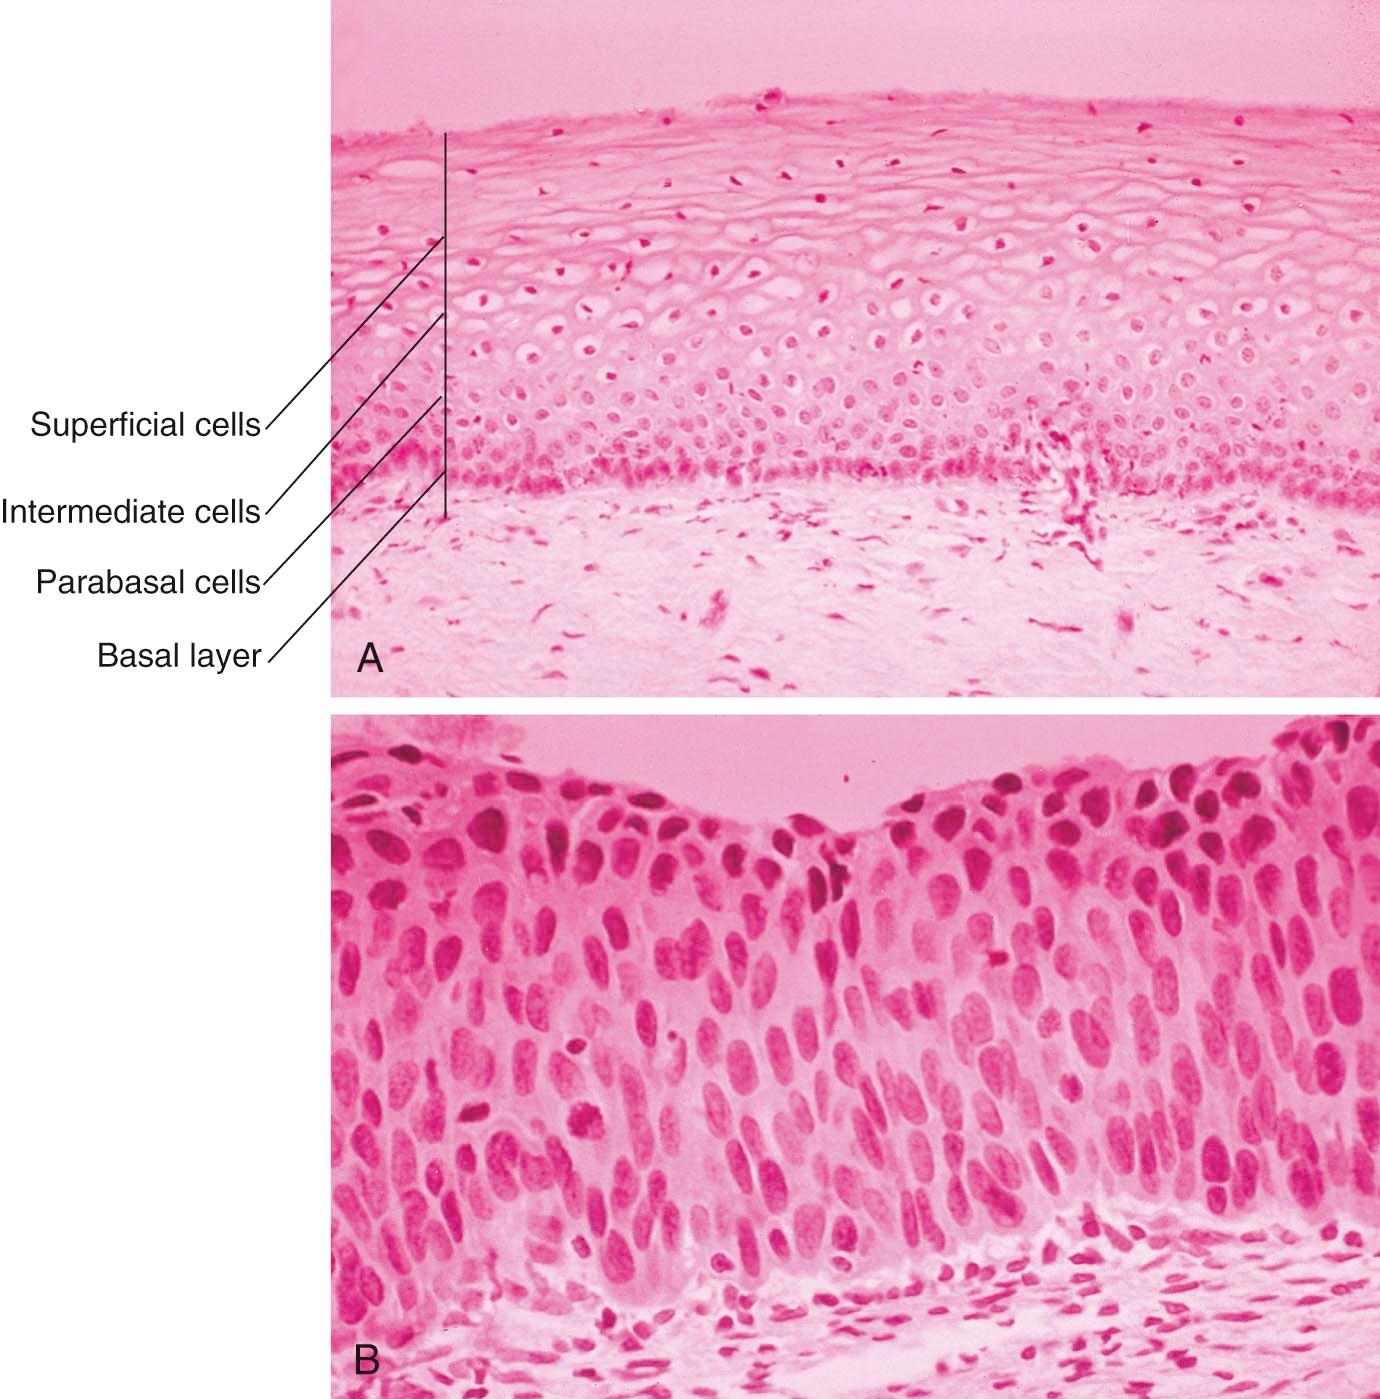 FIGURE 38-2, Histologic appearance of normal cervical squamous epithelium (A) and high-grade squamous intraepithelial lesion (HSIL) (B) of the cervix. In the normal epithelium, note the orderly maturation from the basal layer to the parabasal cells, glycogenated intermediate cells, and flattened superficial cells. In the HSIL, the entire thickness of the epithelium is replaced by immature cells that are variable in size and shape and have irregular nuclei. Mitotic figures are seen in the lower two-thirds of the epithelium.